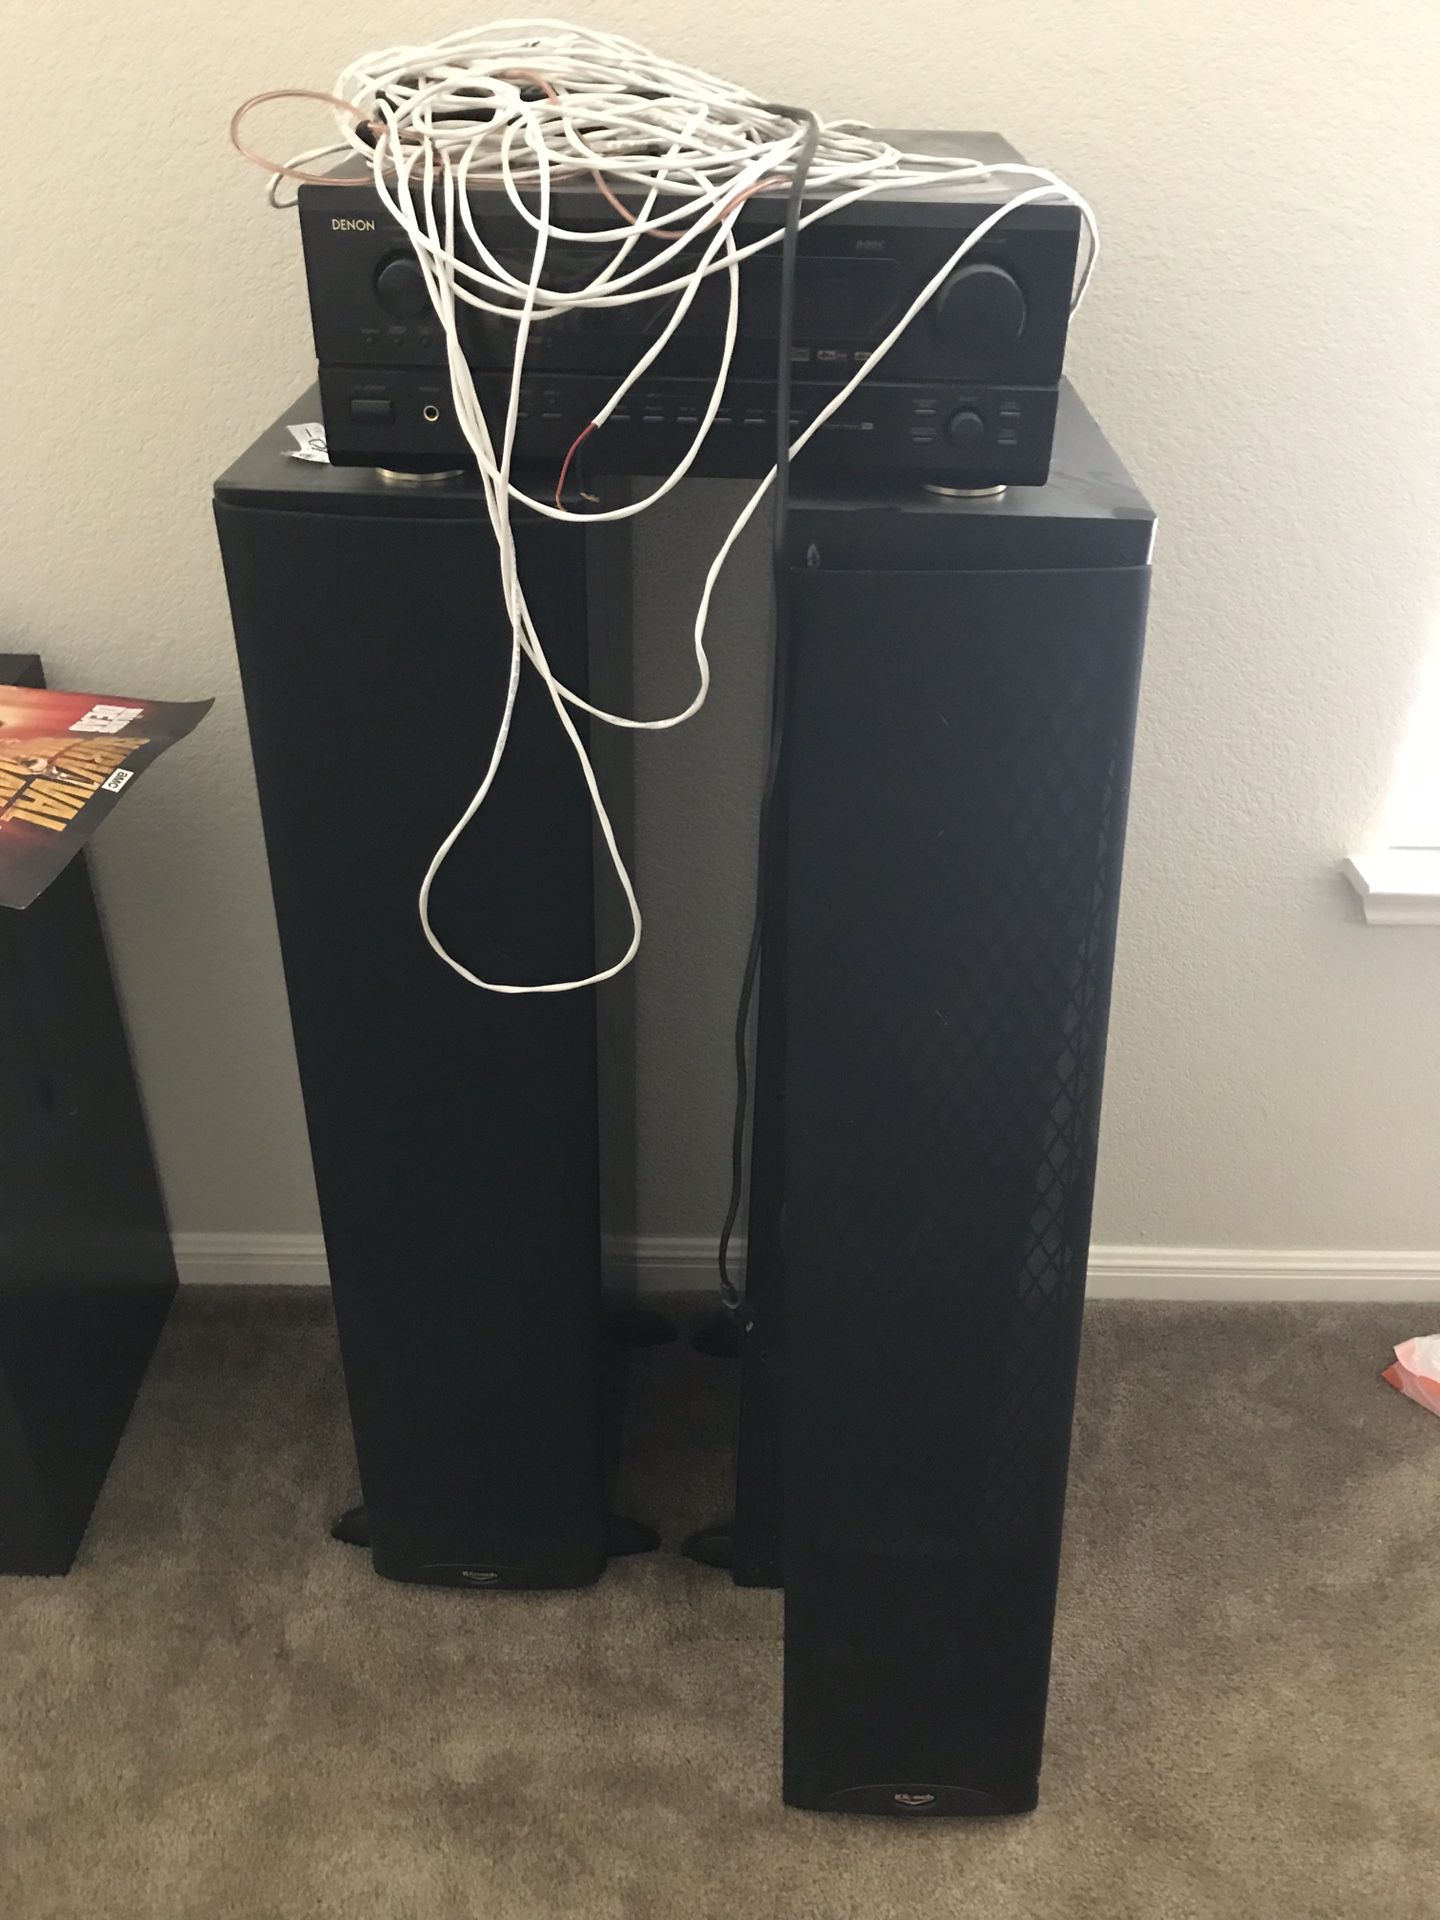 Speakers system- Denon AVR-3803 receiver and two Klipsch RF5 Black